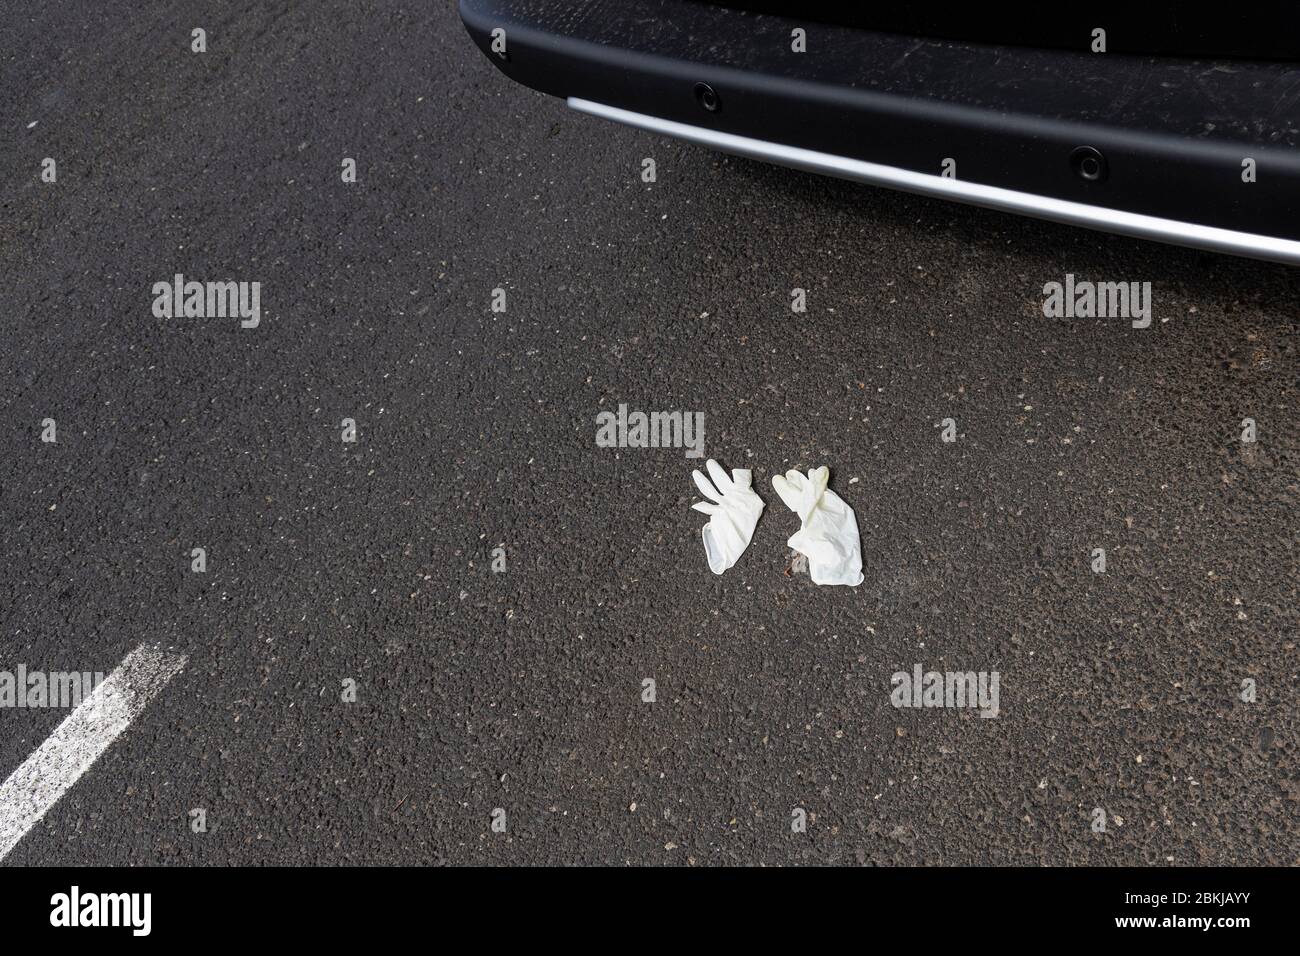 Discarded plastic gloves on the road during the covid 19 lockdown in the tourist resort area of Costa Adeje, Tenerife, Canary Islands, Spain Stock Photo